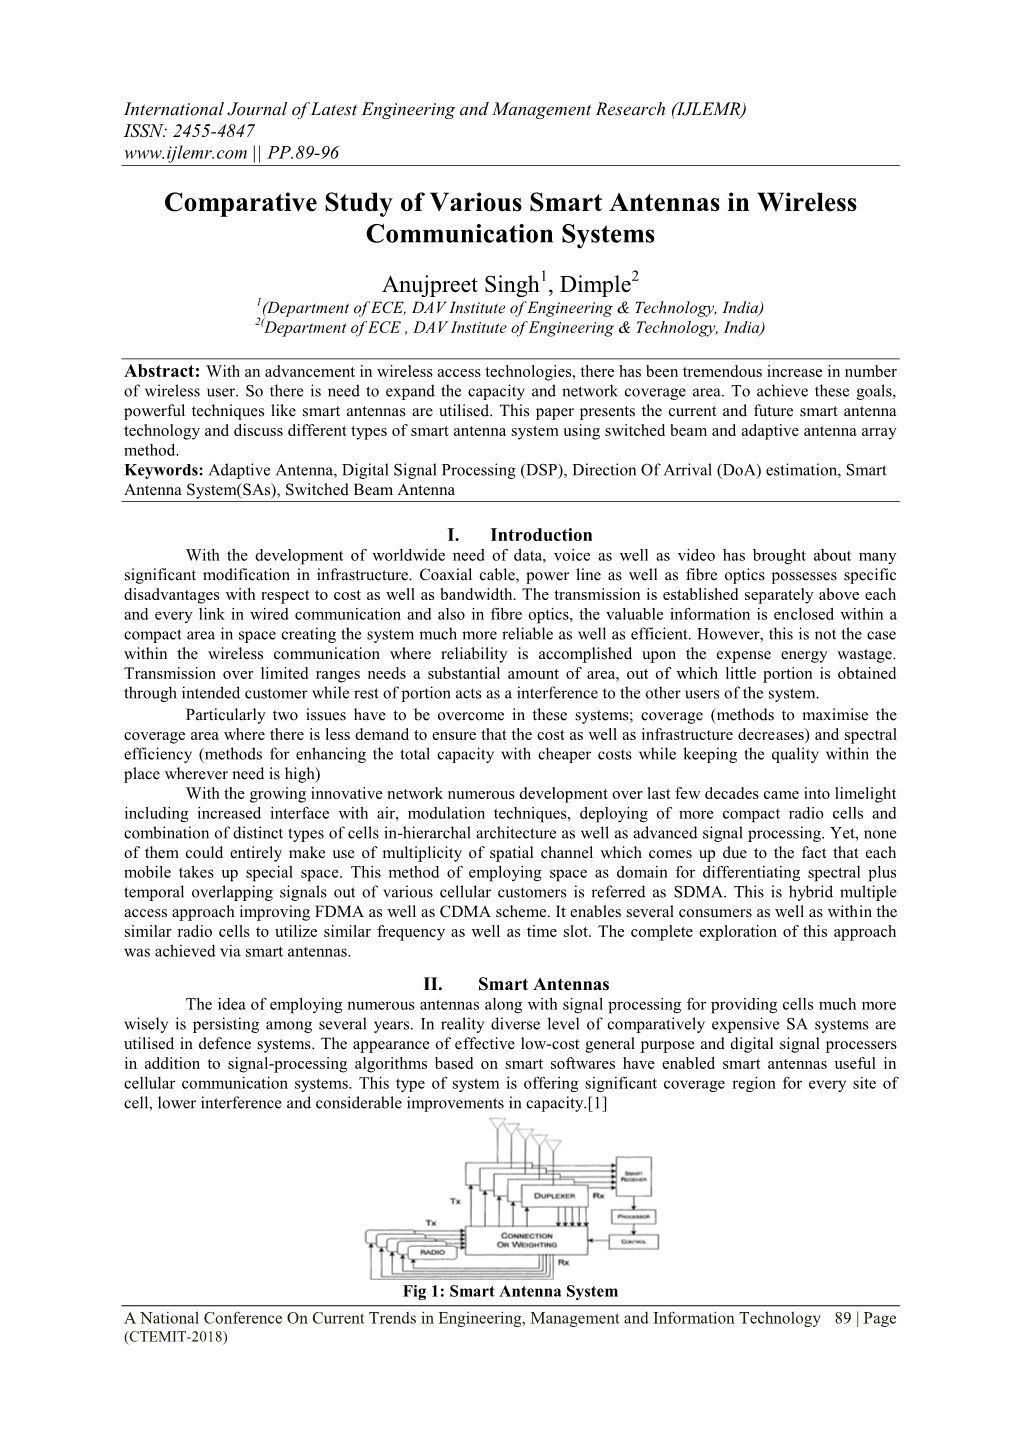 Comparative Study of Various Smart Antennas in Wireless Communication Systems